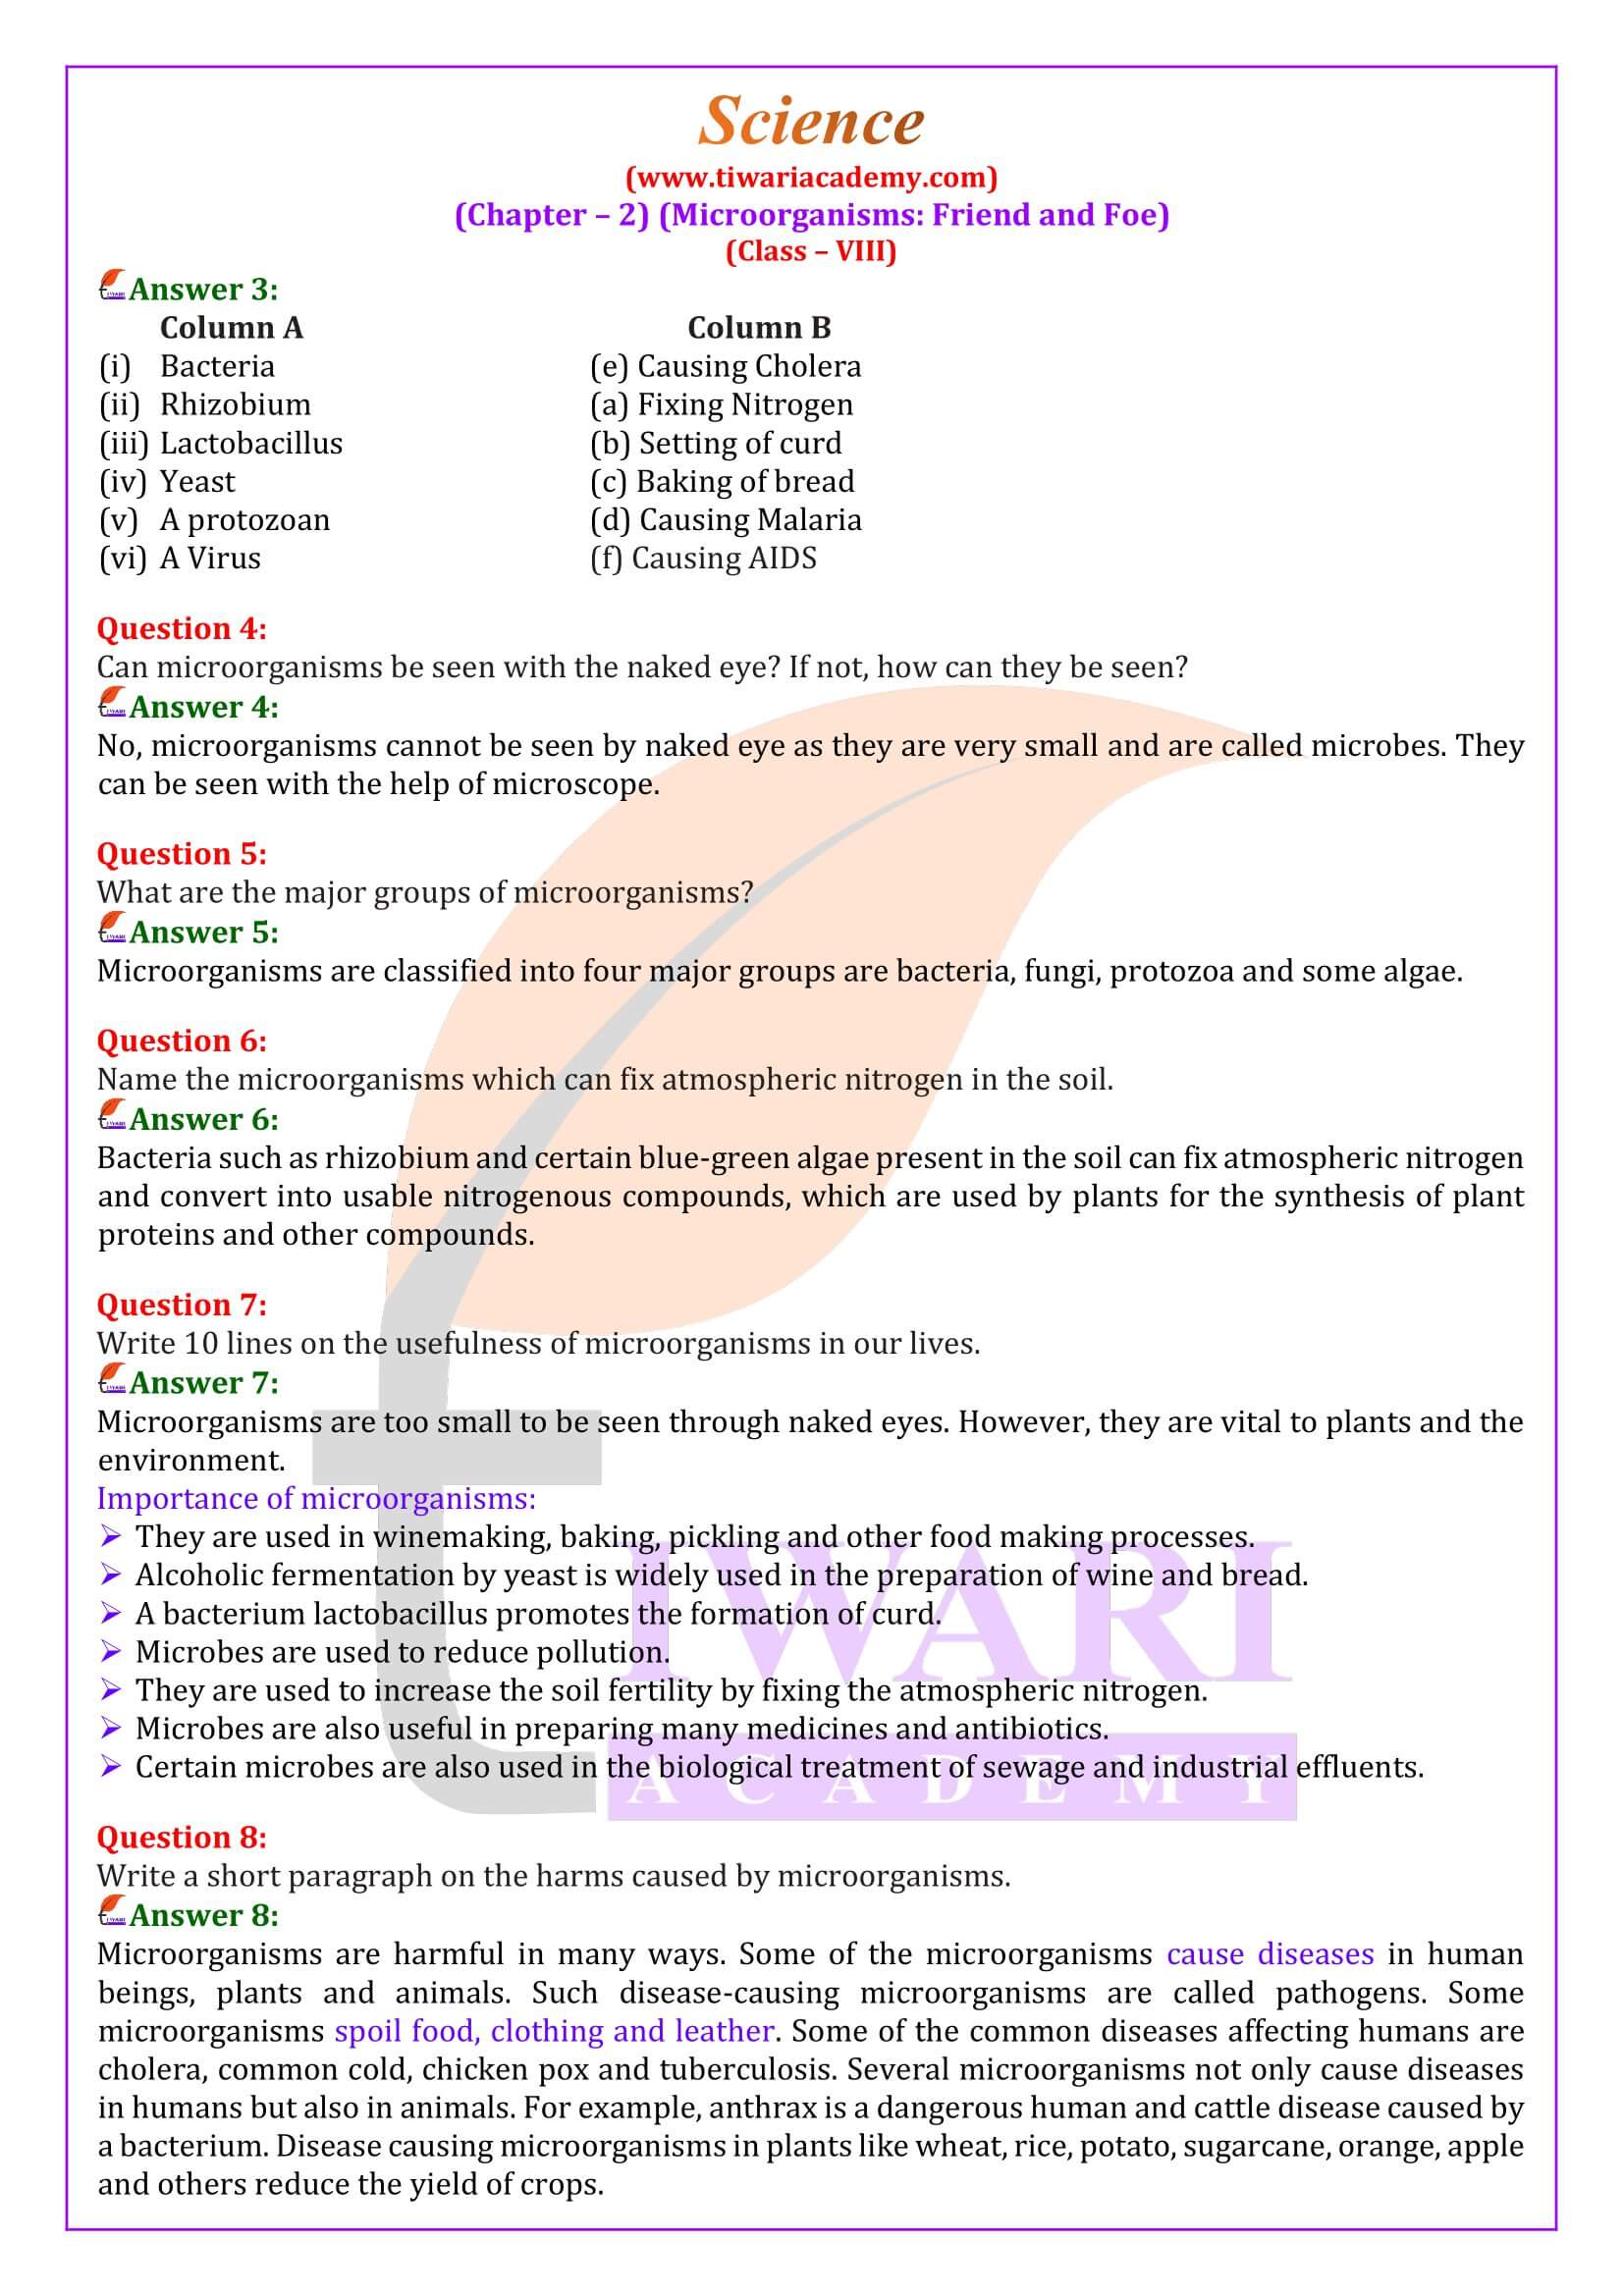 NCERT Solutions for Class 8 Science Chapter 2 in English Medium